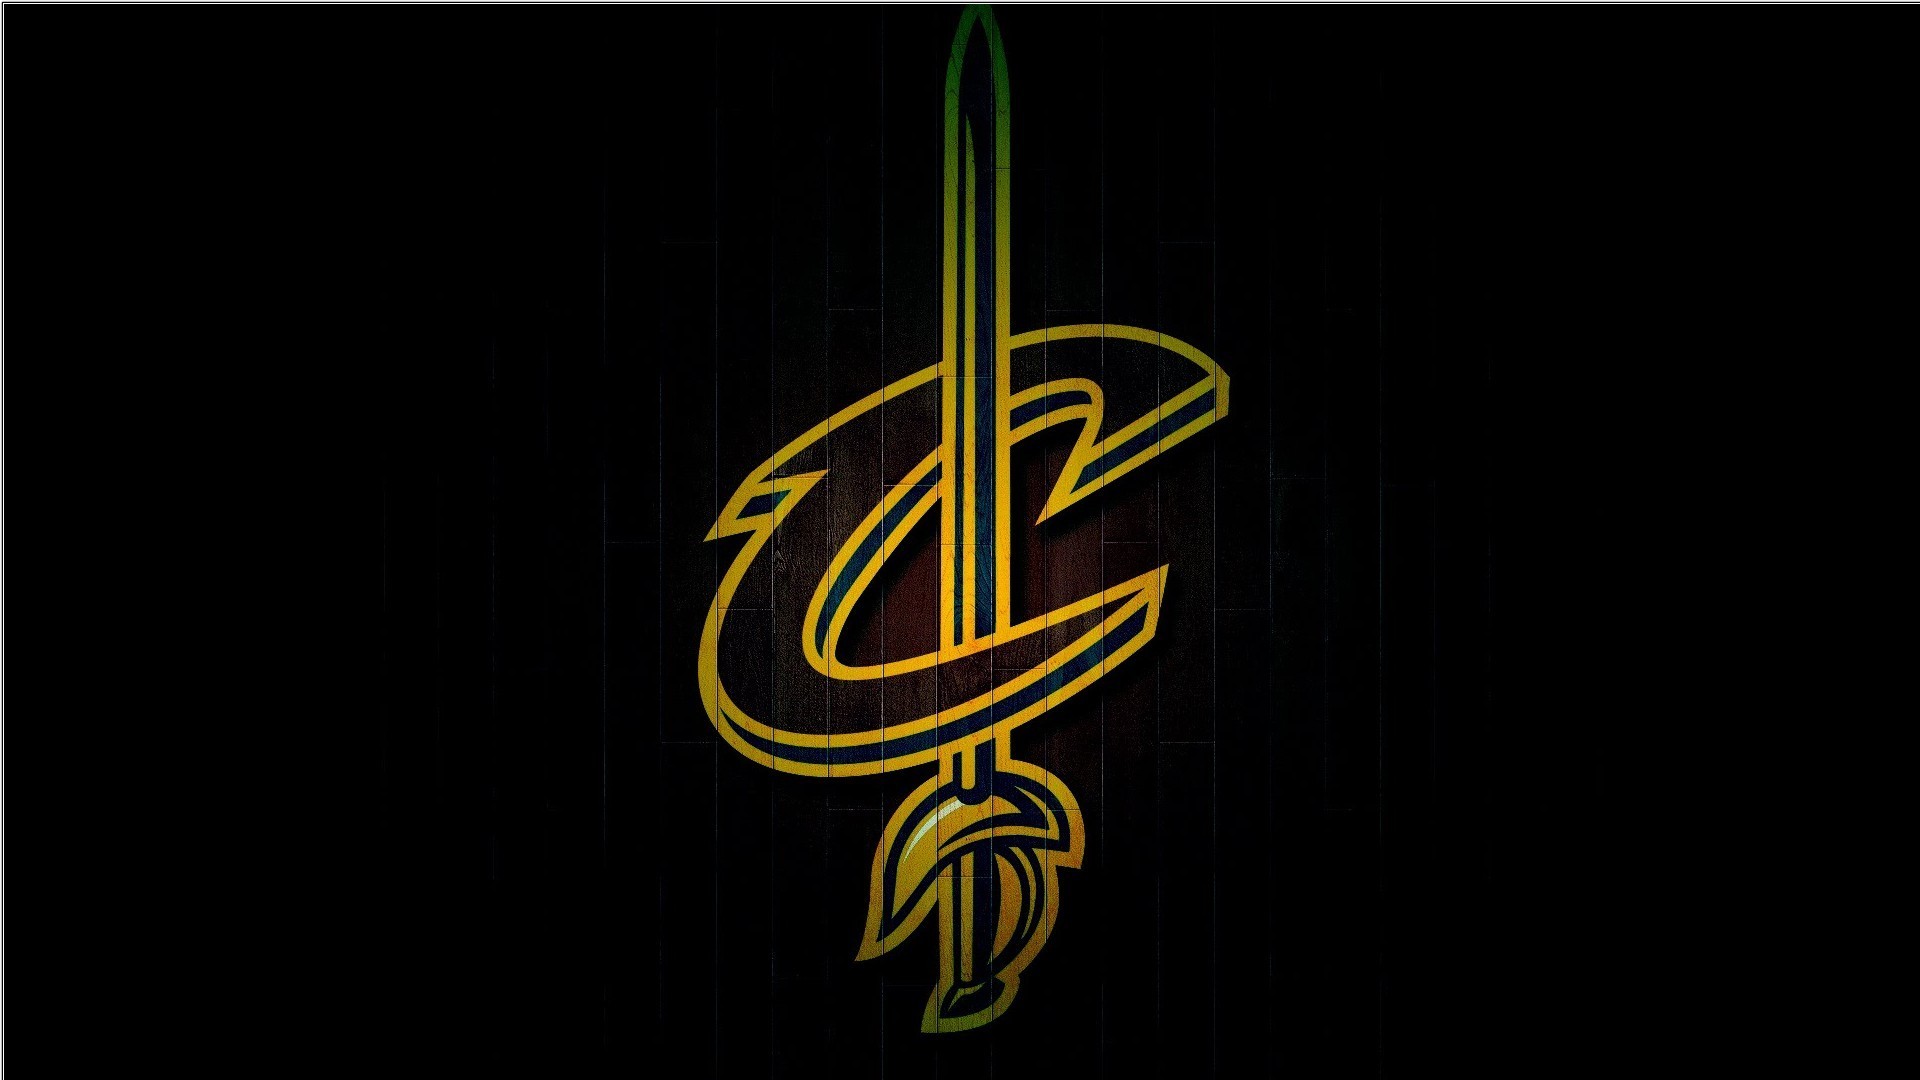 HD Backgrounds Cavs With Resolution 1920X1080